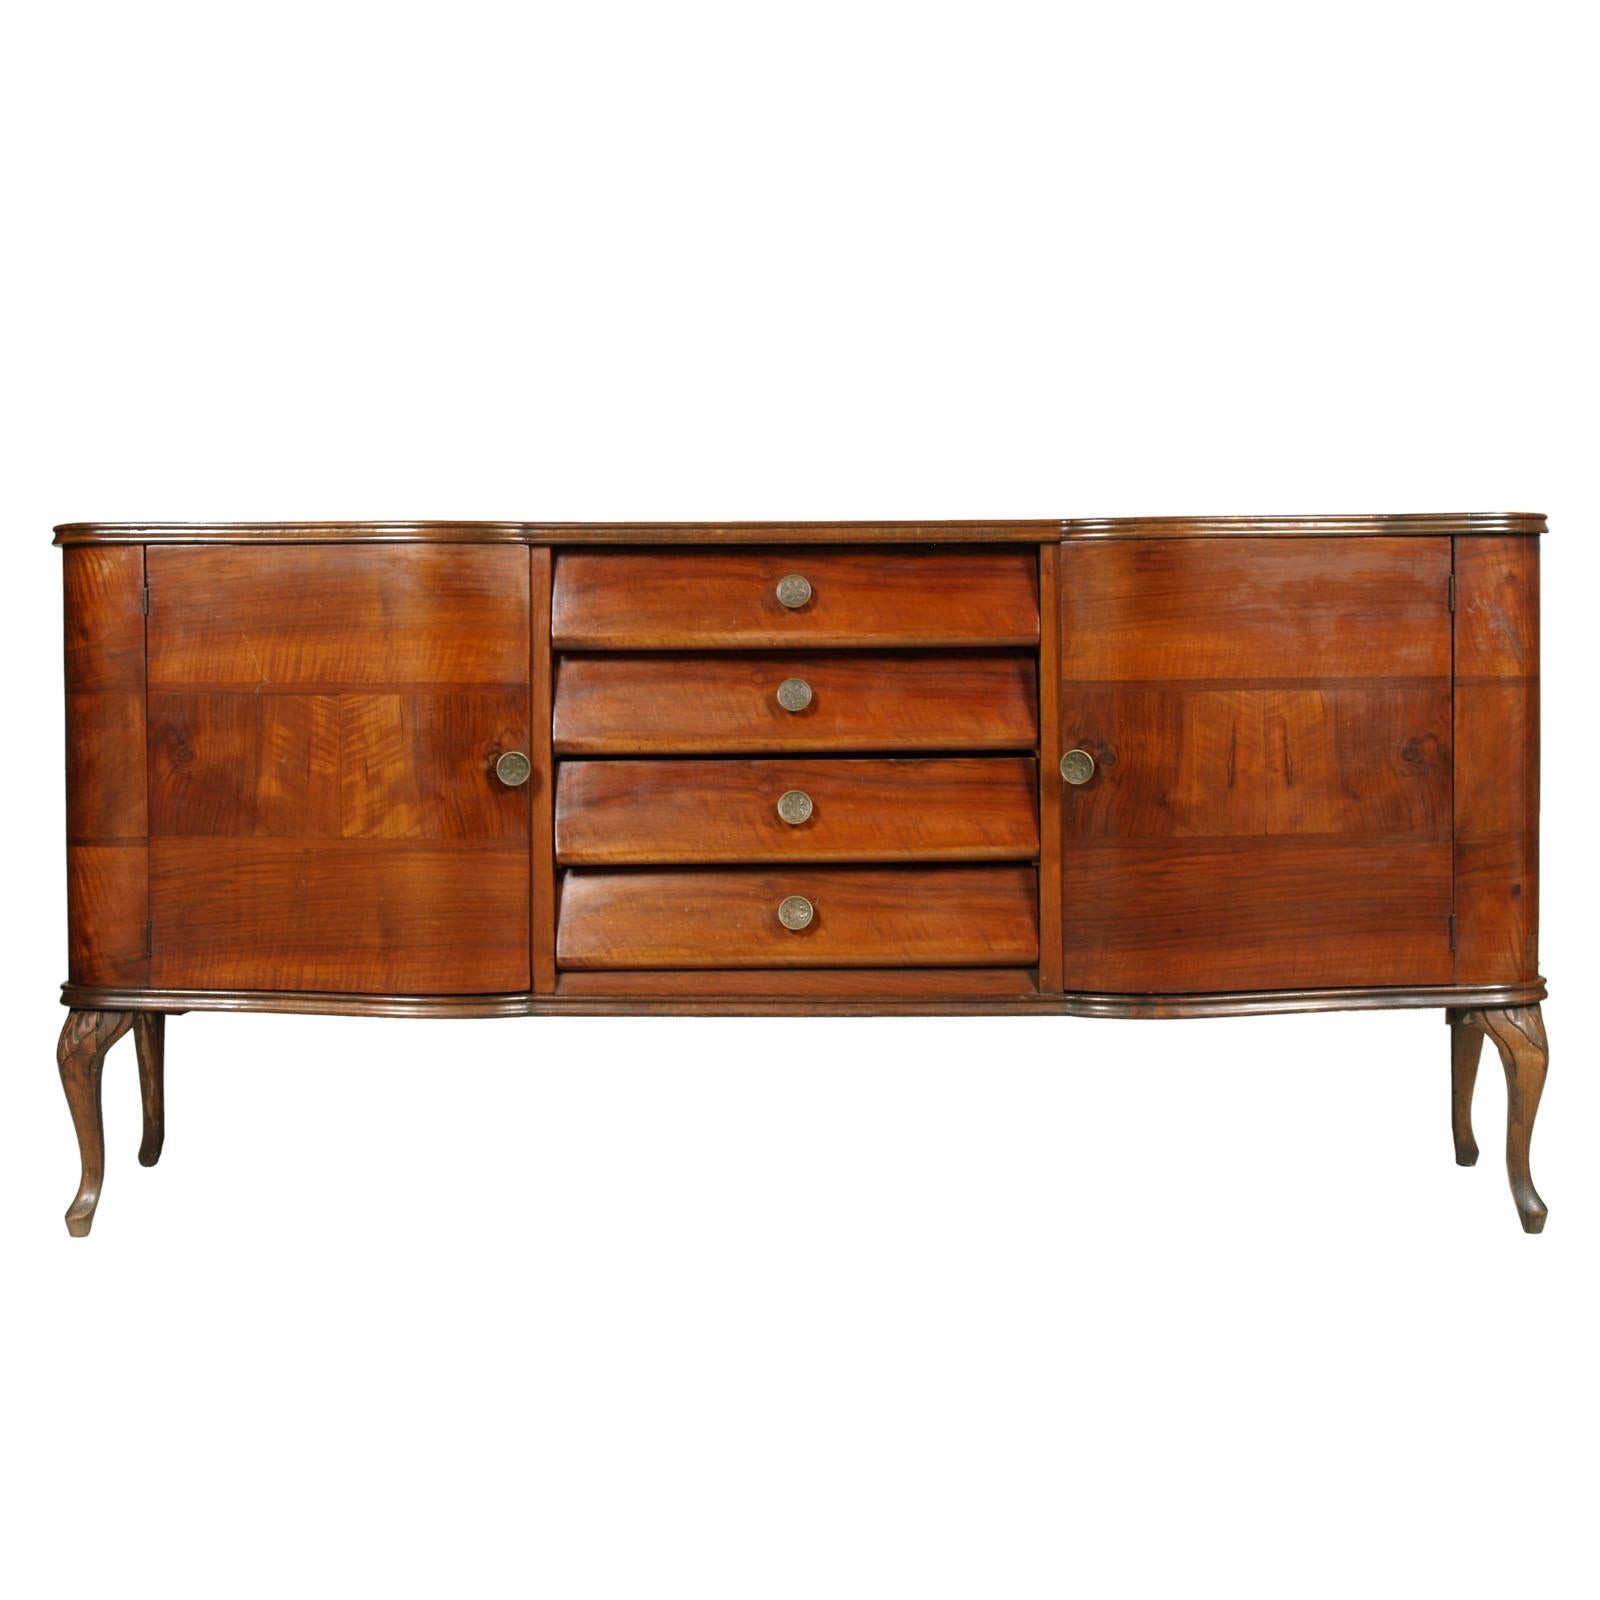 Venetian baroque sideboard with glazed display, attributable to Testolini & Salviati in hand carved walnut and veneer  walnut, with four central spacious drawers
The display cabinet glasses are decorated with manually engraved nautical motifs
The